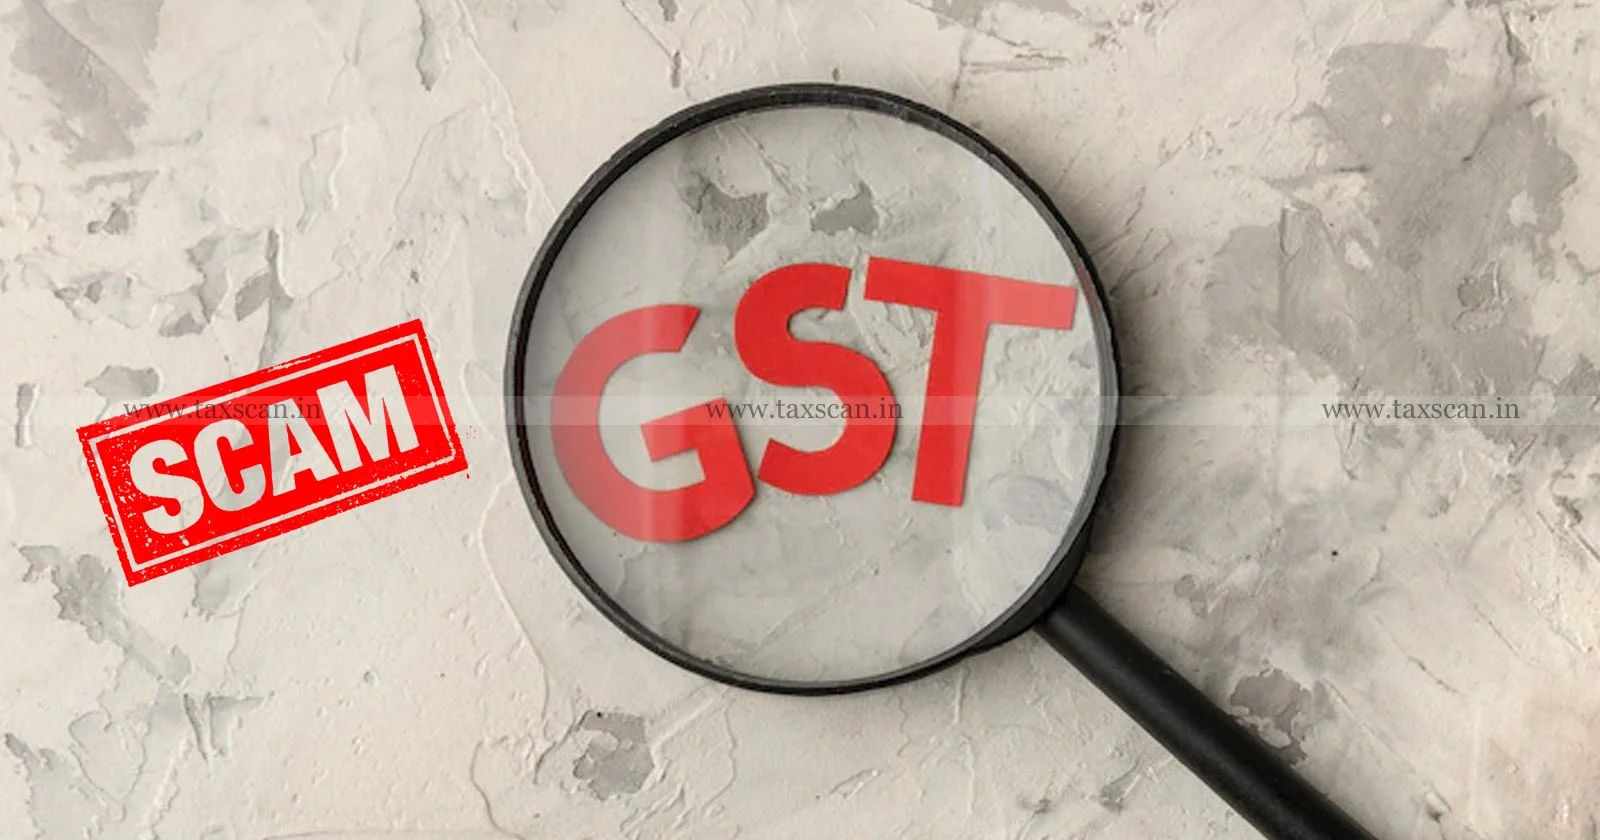 GST Refund Claim - Forged Documents - Hyderabad Central Crime - arrests 5 GST Officials - taxscan